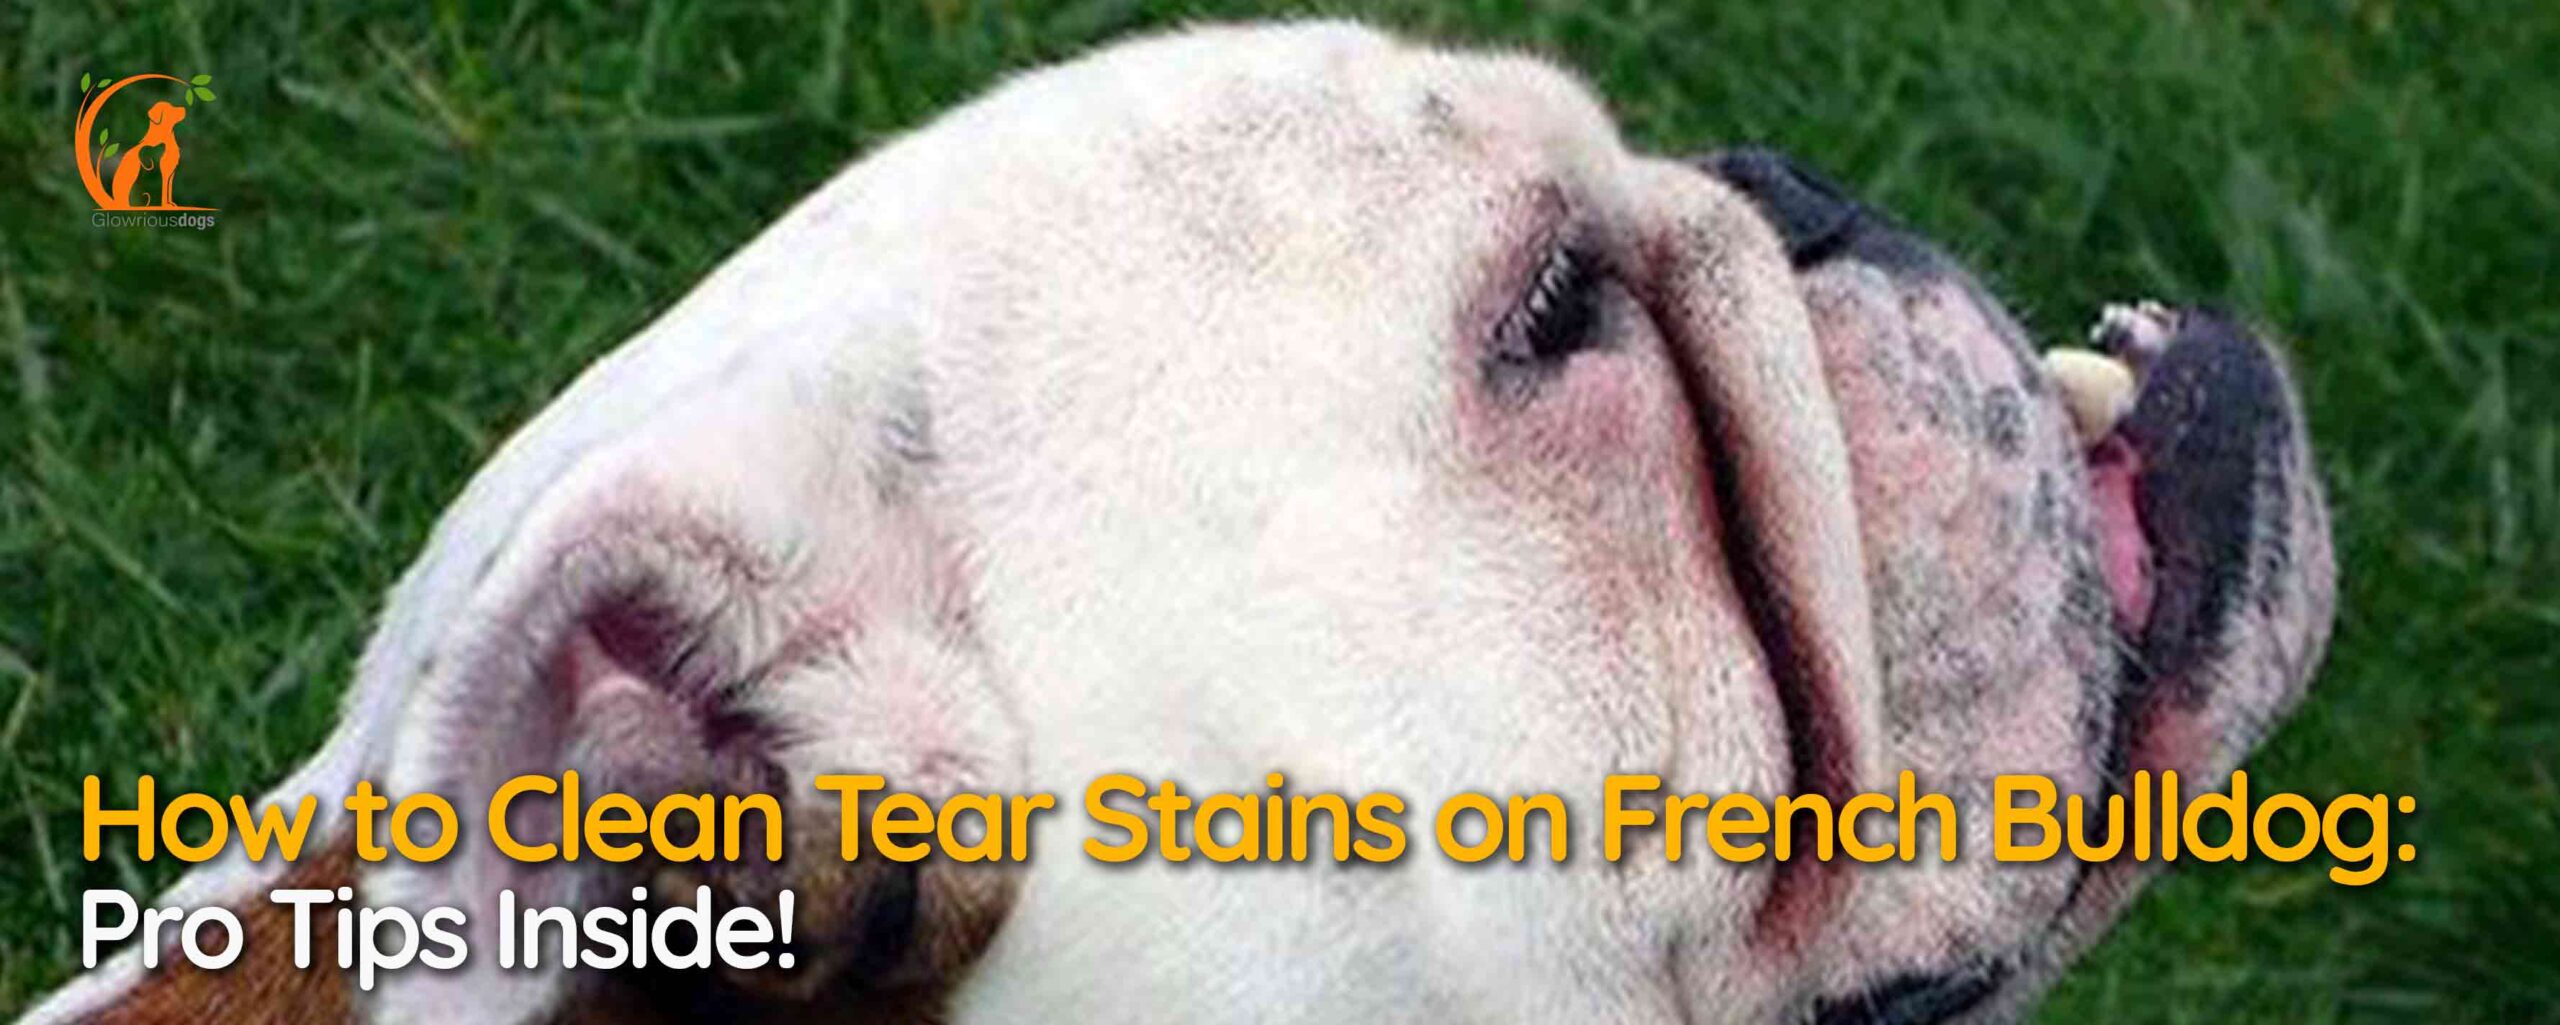 How to Clean Tear Stains on French Bulldog: Pro Tips Inside!